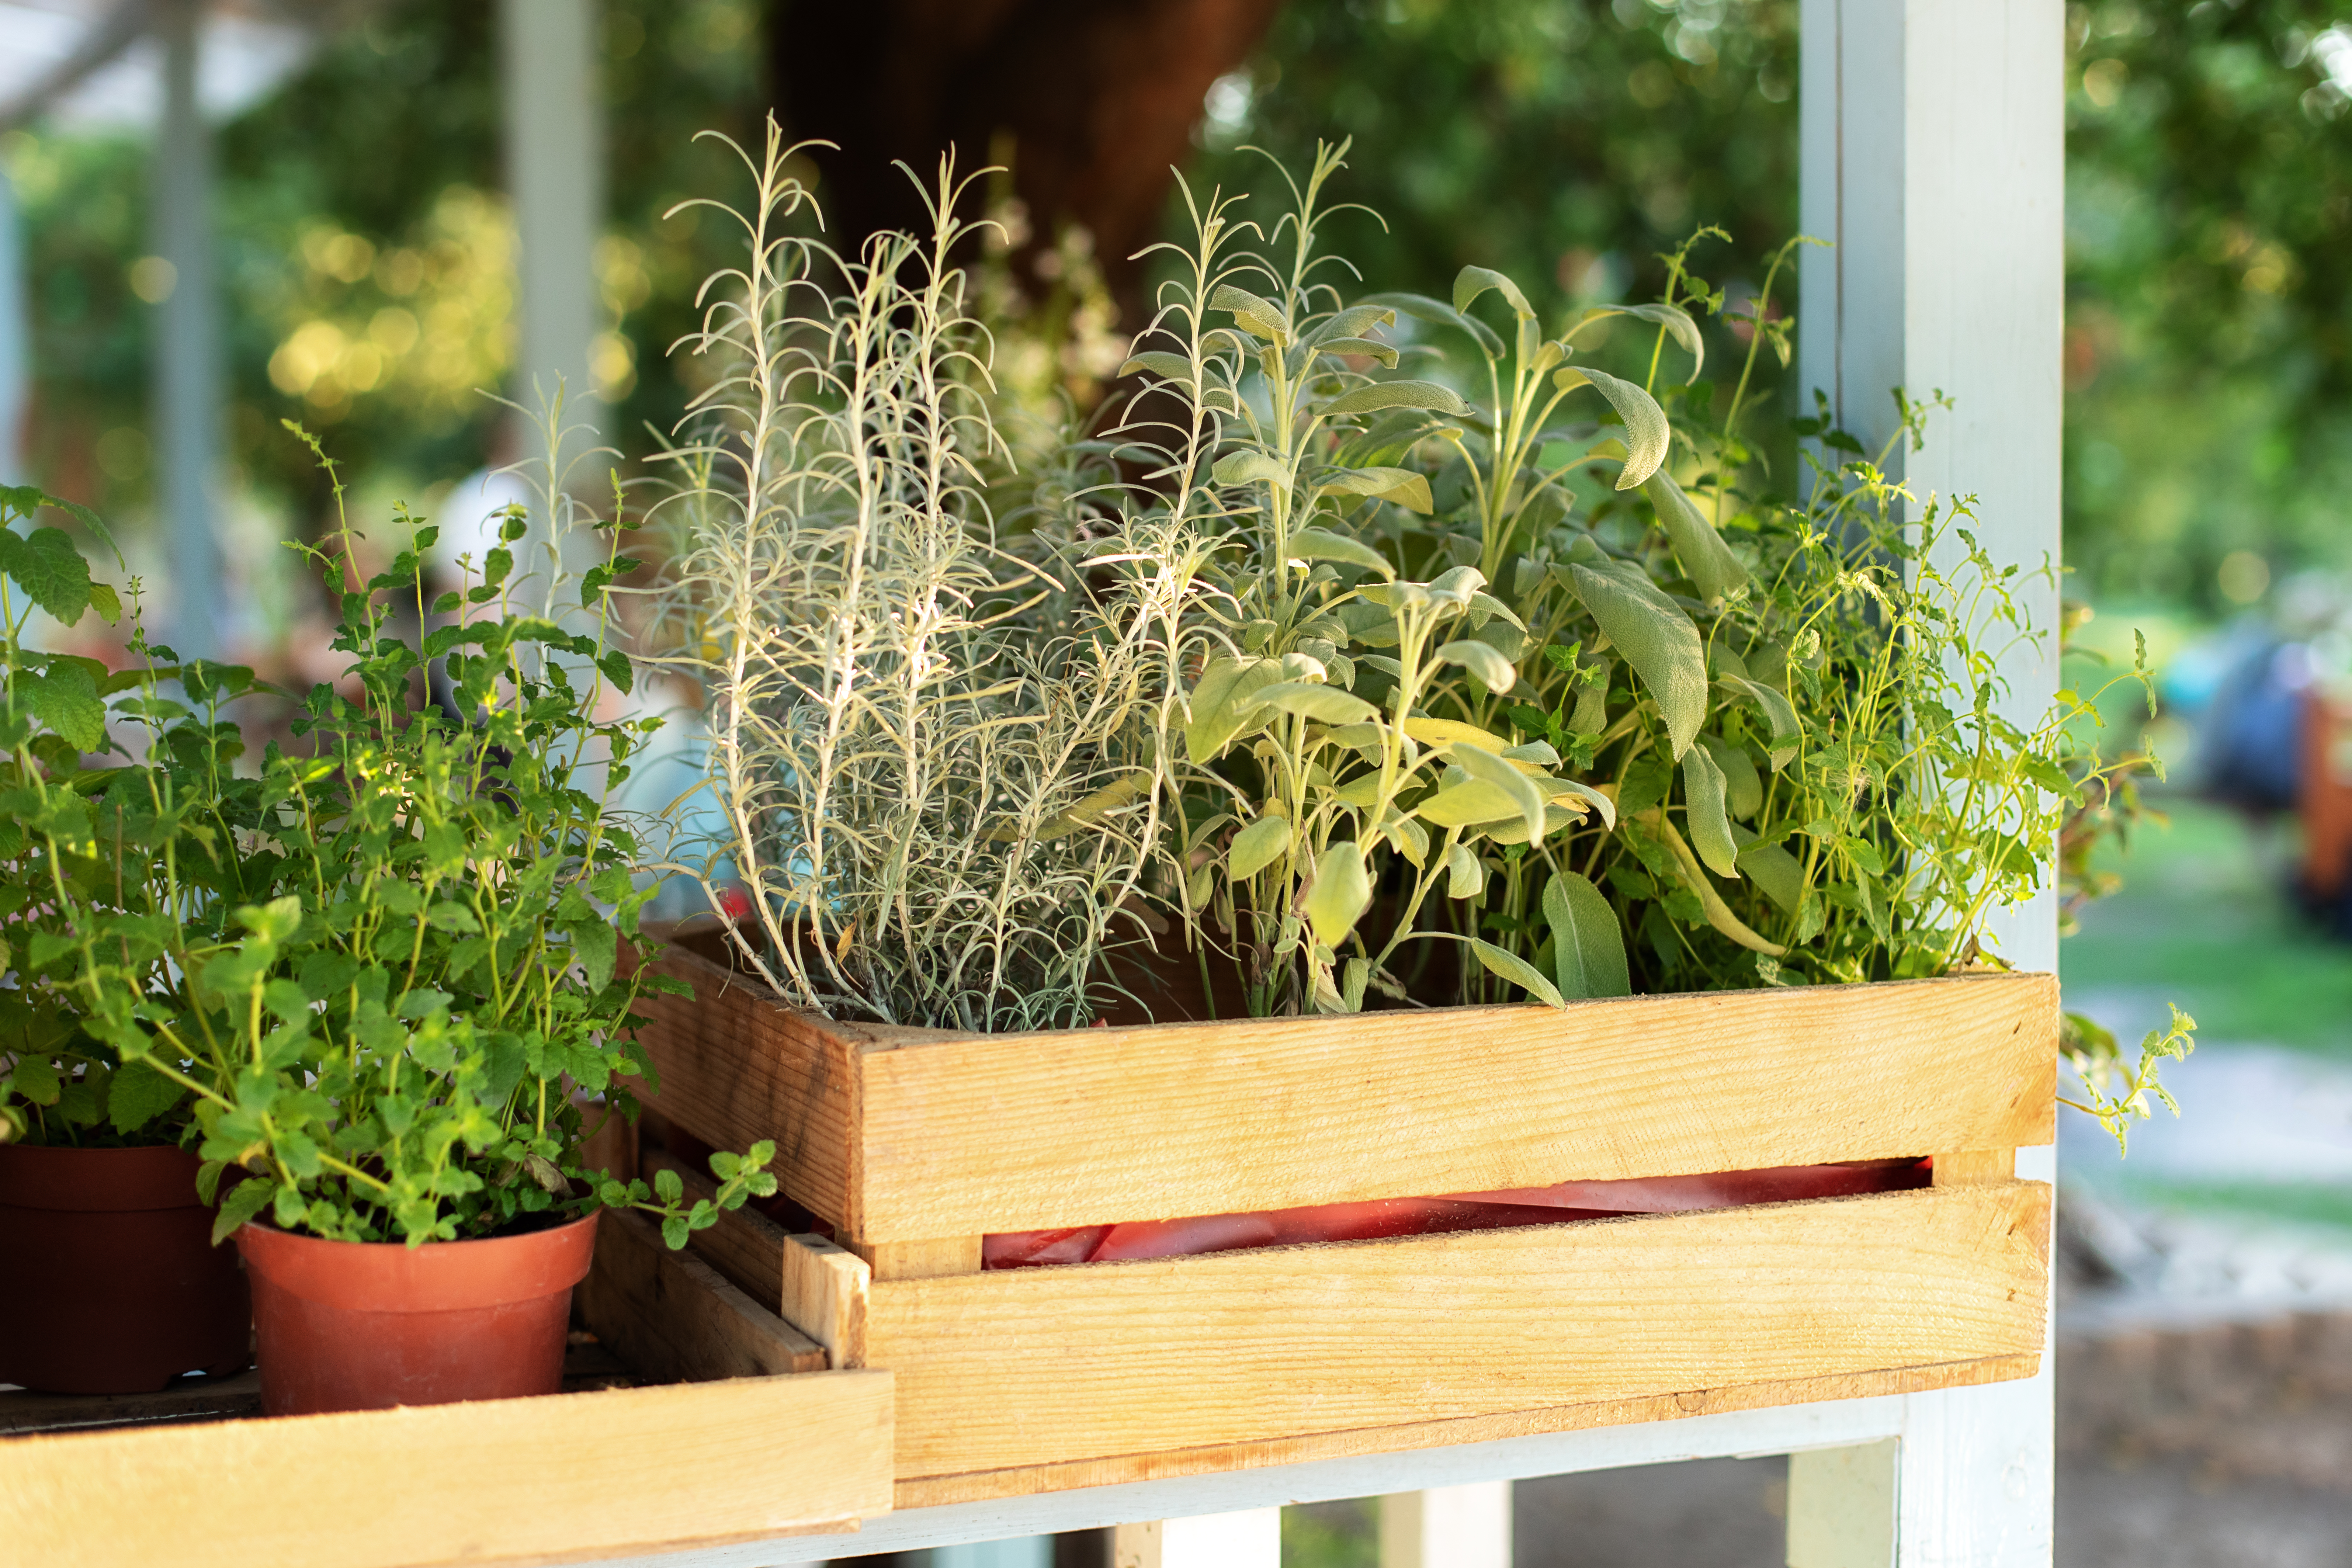 Herb plants growing in containers held in a wooden crate